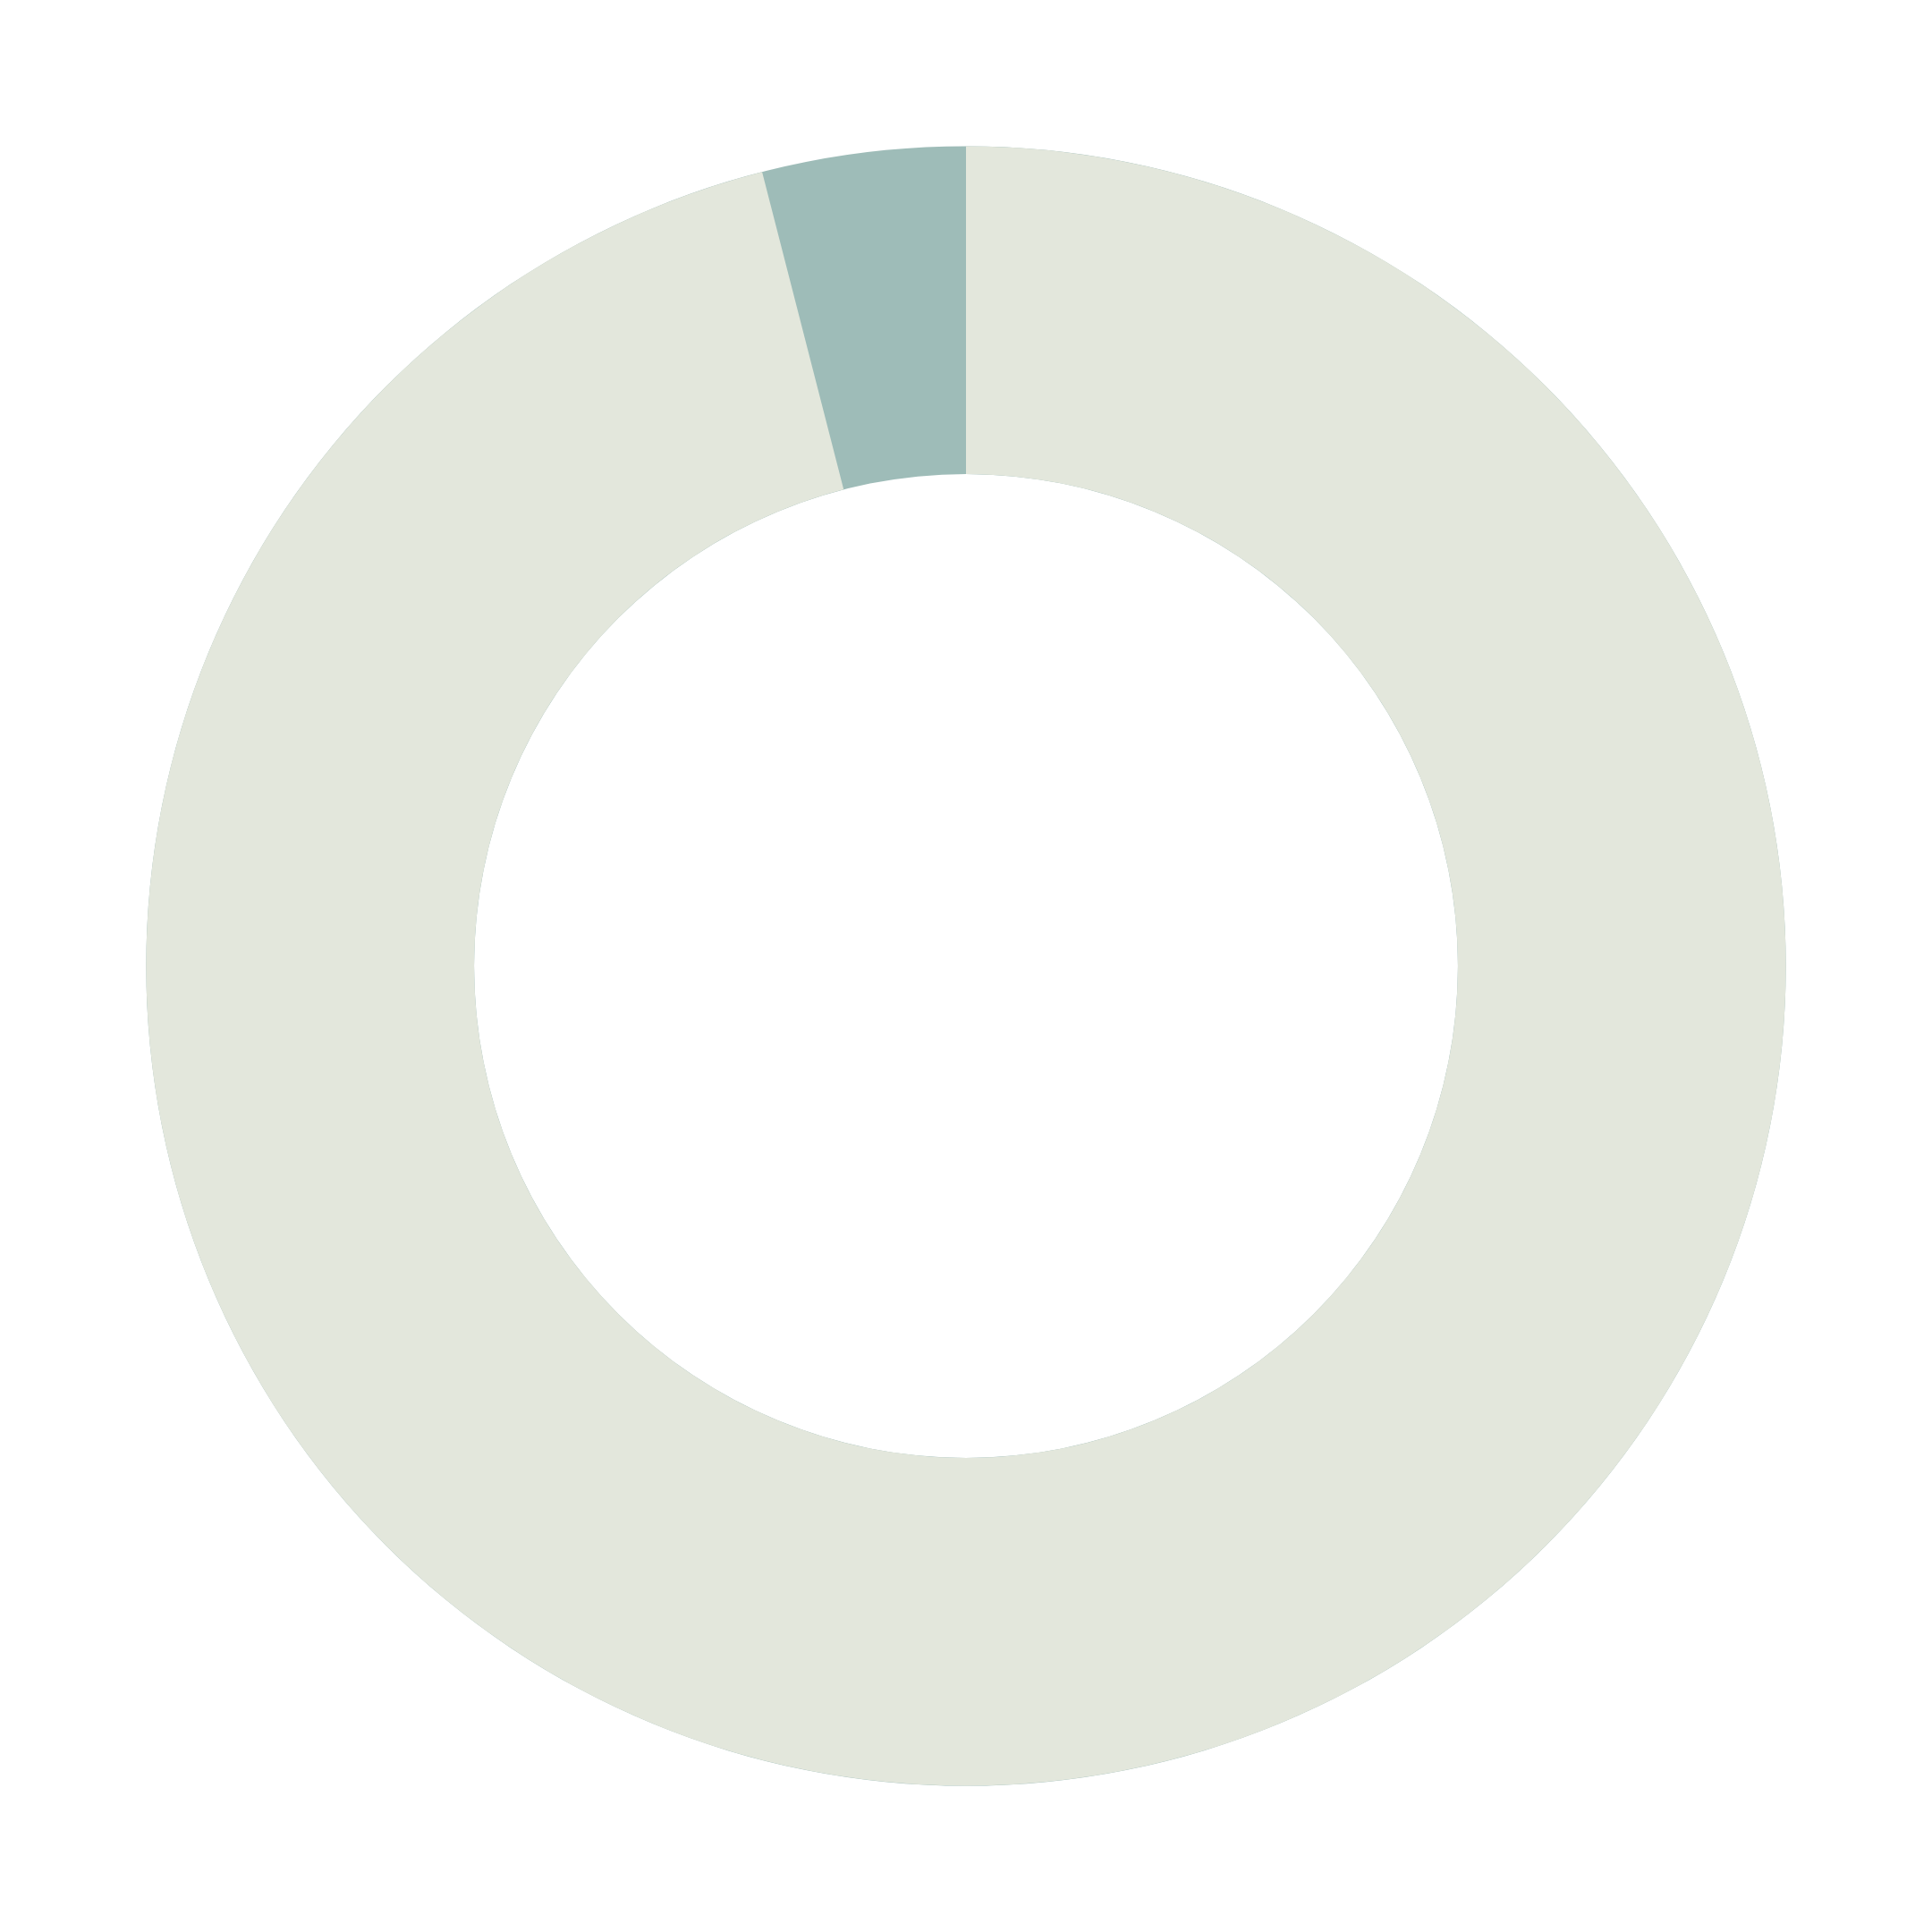 Circle graph with 96% filled